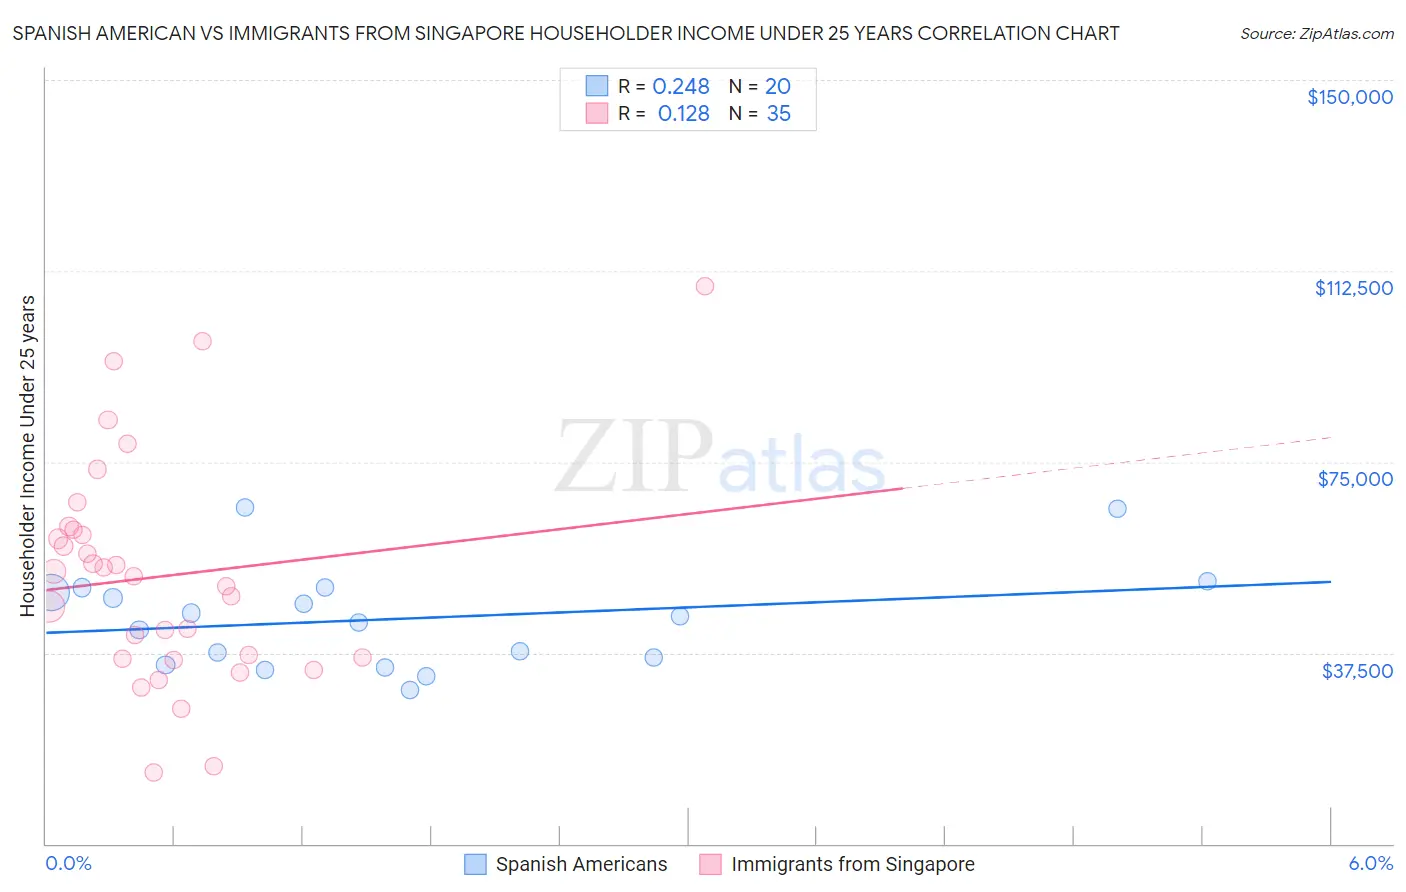 Spanish American vs Immigrants from Singapore Householder Income Under 25 years